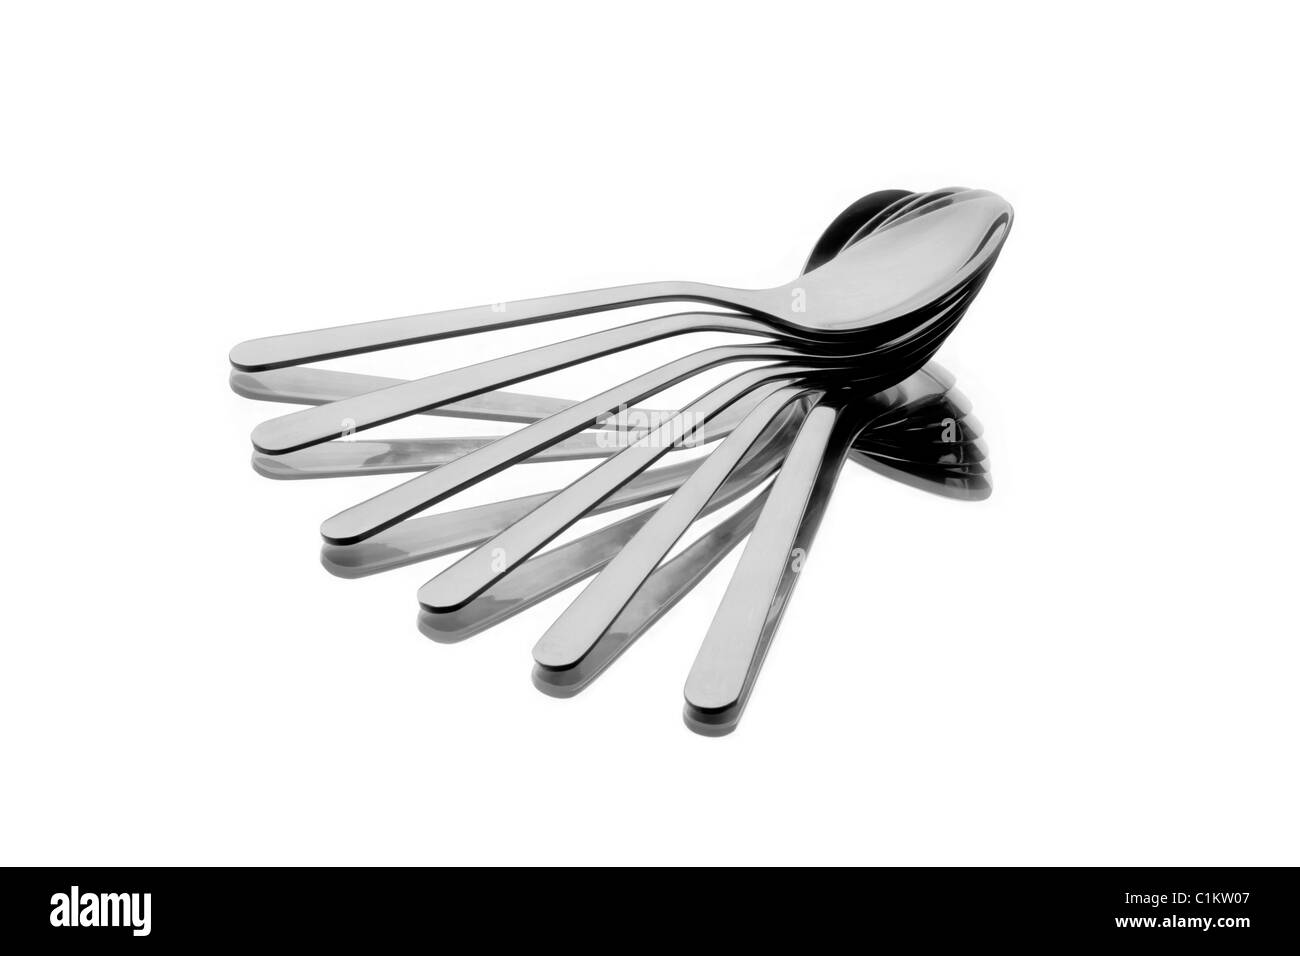 Six spoons spread as a fan on reflecting background Stock Photo